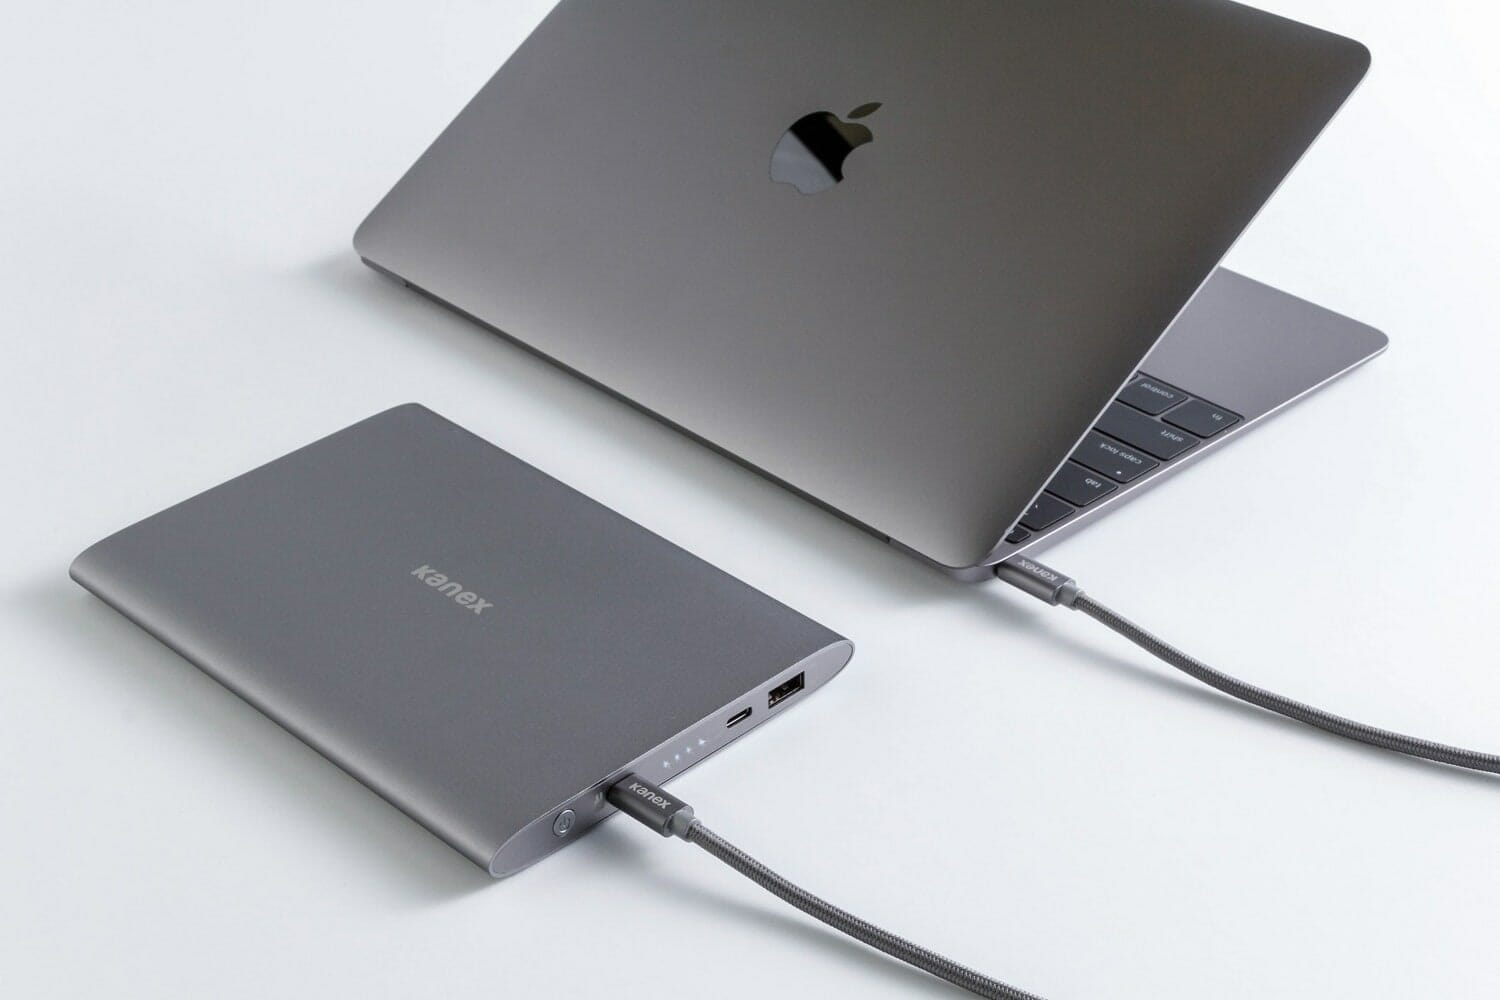 Review: Kanex GoPower USB-C portable battery pack for 12-inch MacBook